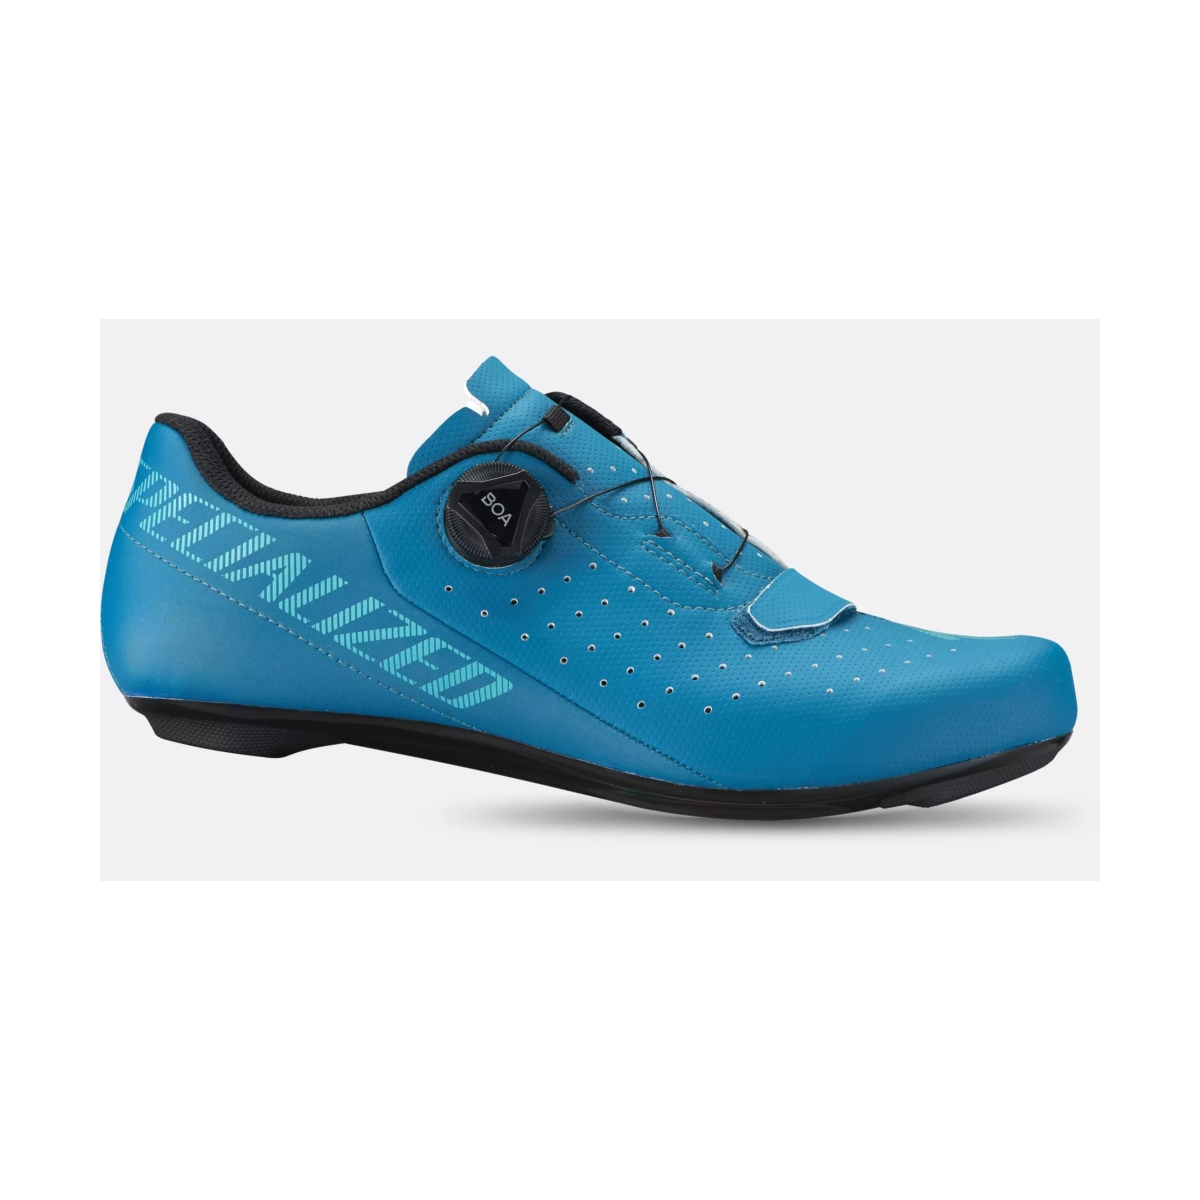 Buty Rowerowe SPECIALIZED Torch 1.0 RD -blue -2022